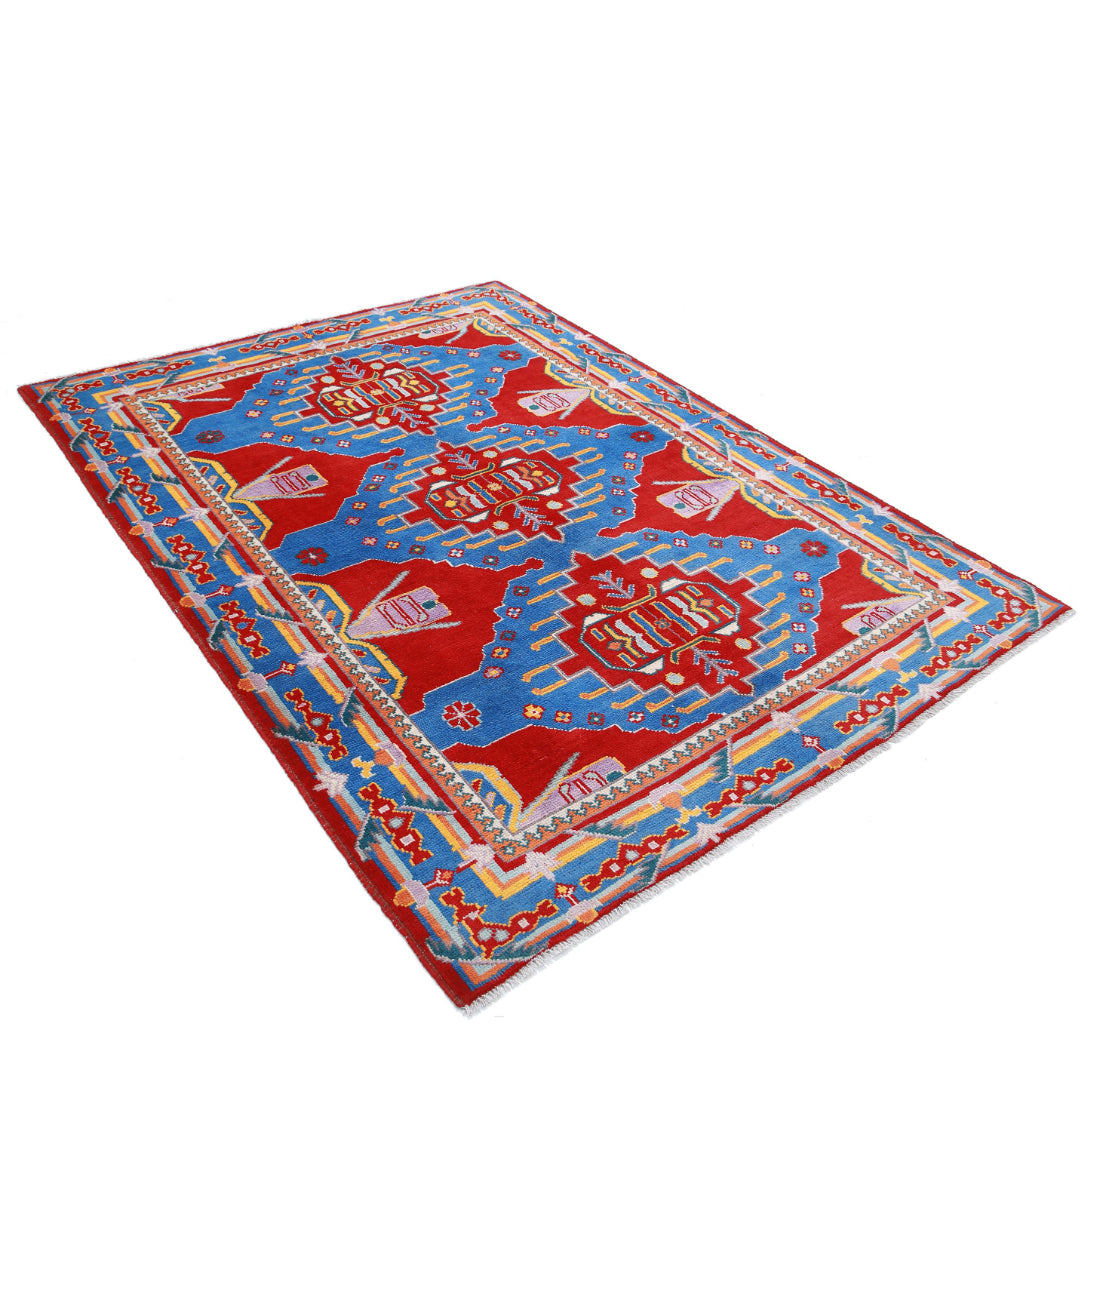 Revival 5'6'' X 7'11'' Hand-Knotted Wool Rug 5'6'' x 7'11'' (165 X 238) / Red / Blue